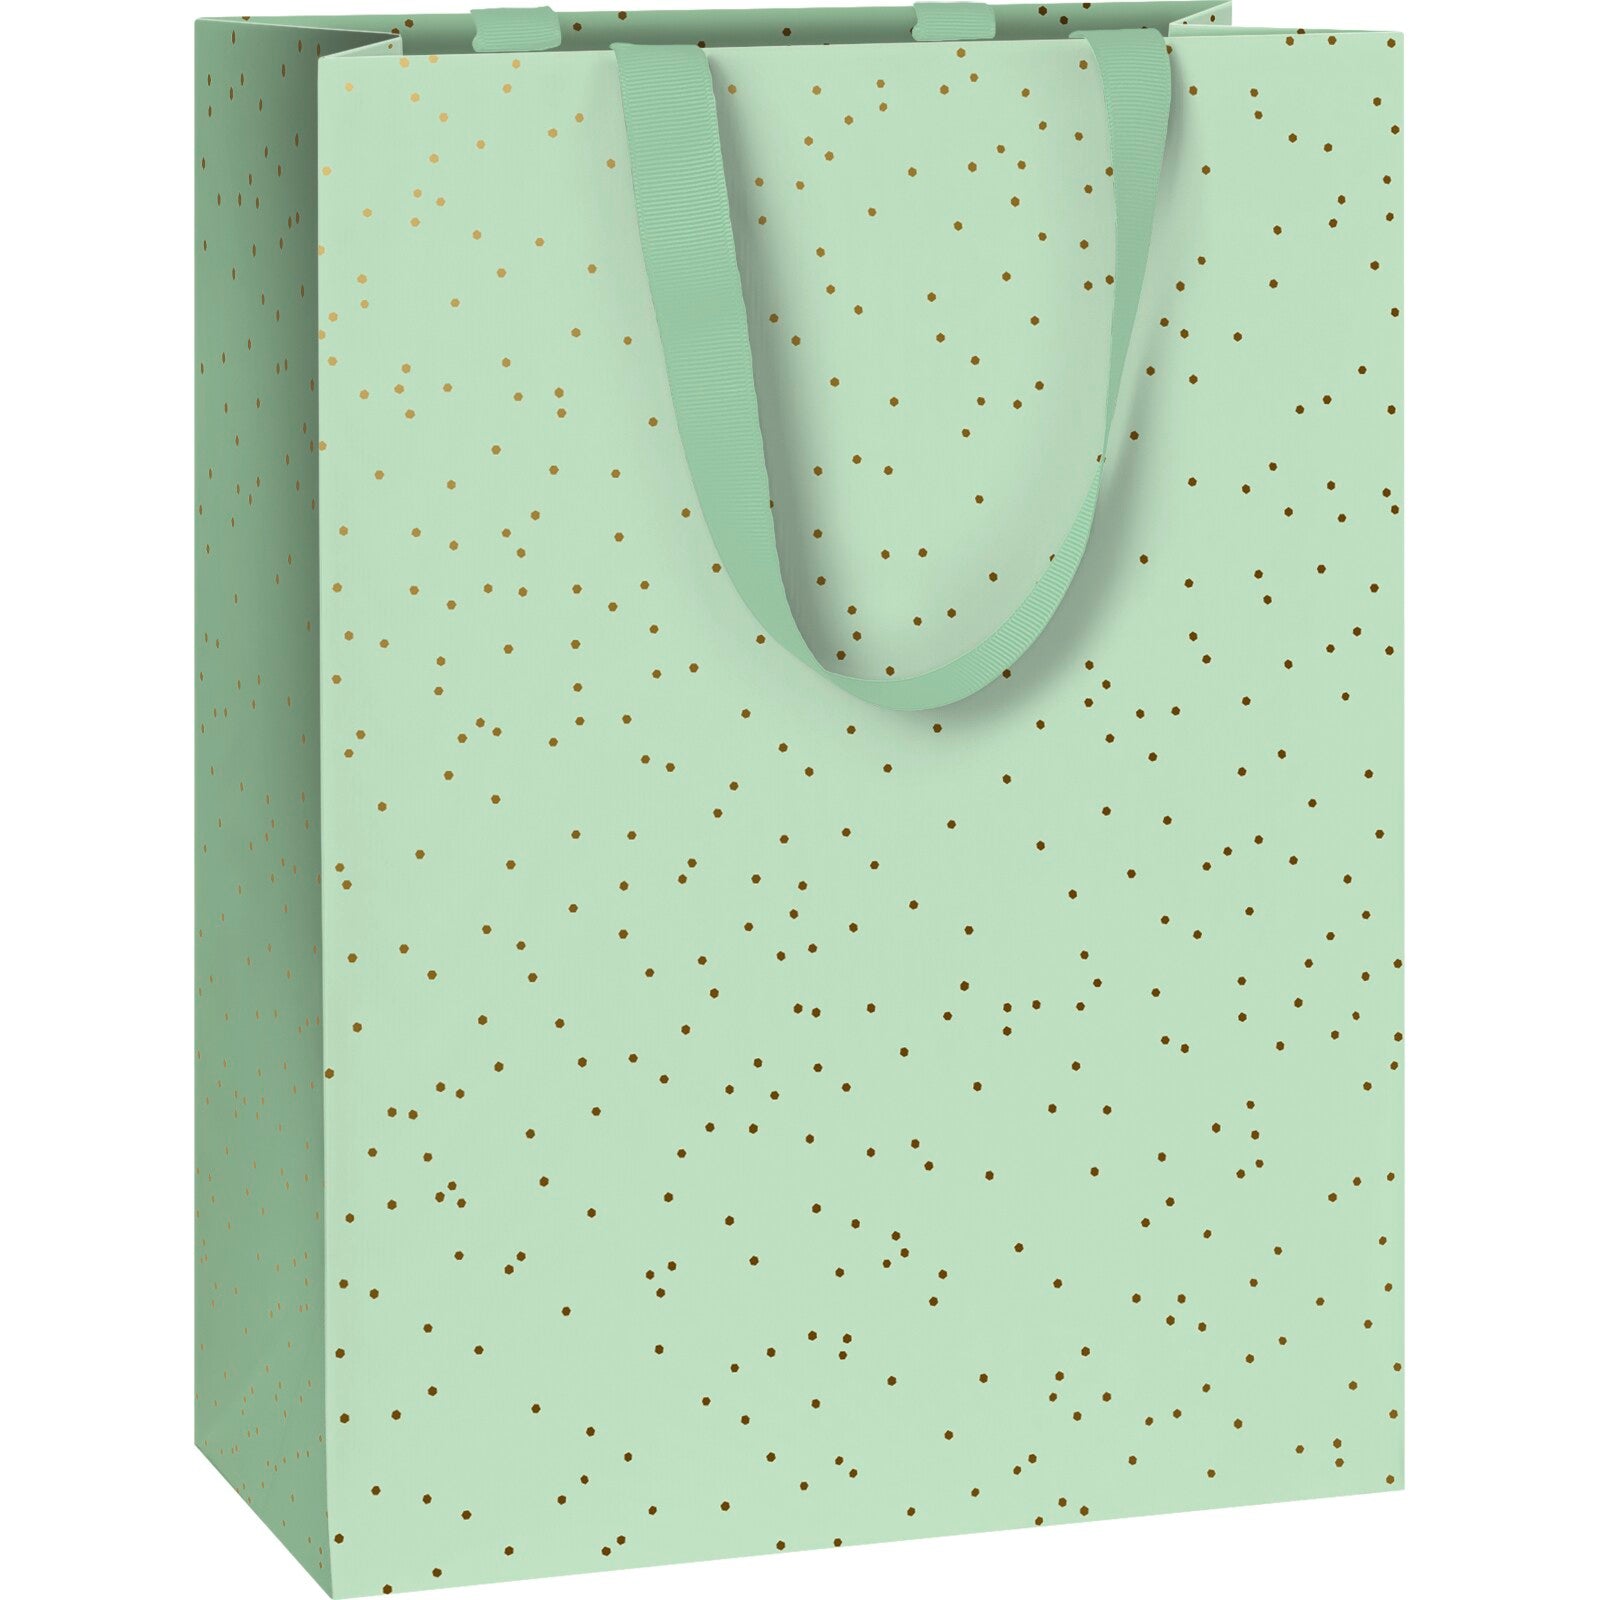 Yvie Spotty Large Gift Bag by penny black